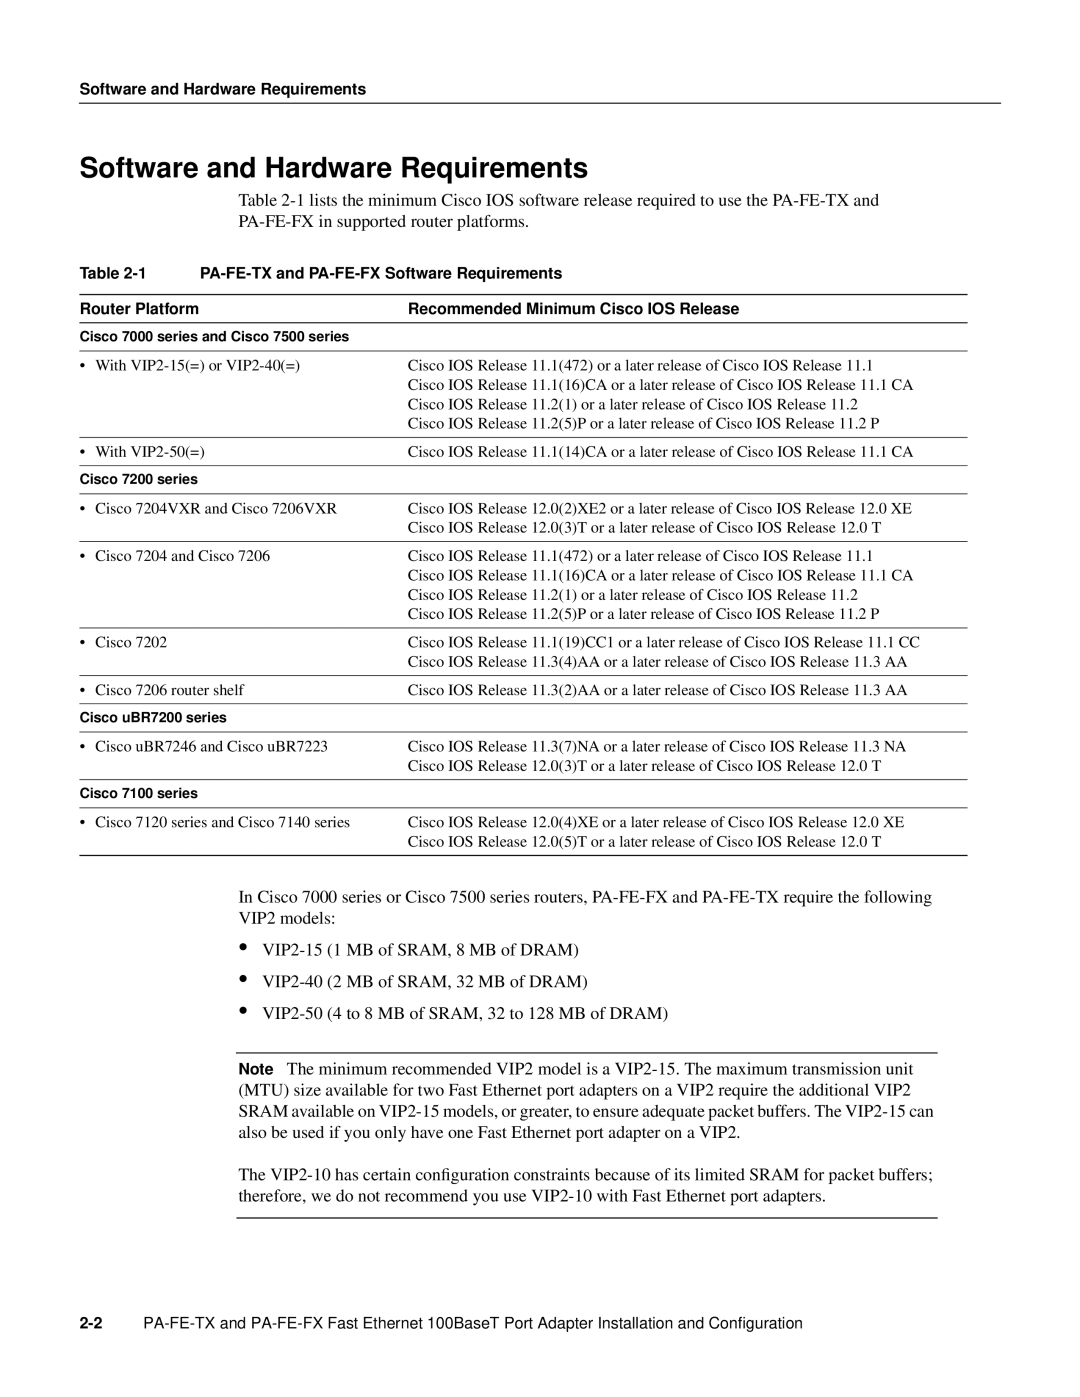 Cisco Systems PA-FE-TX, PA-FE-FX manual Software and Hardware Requirements 